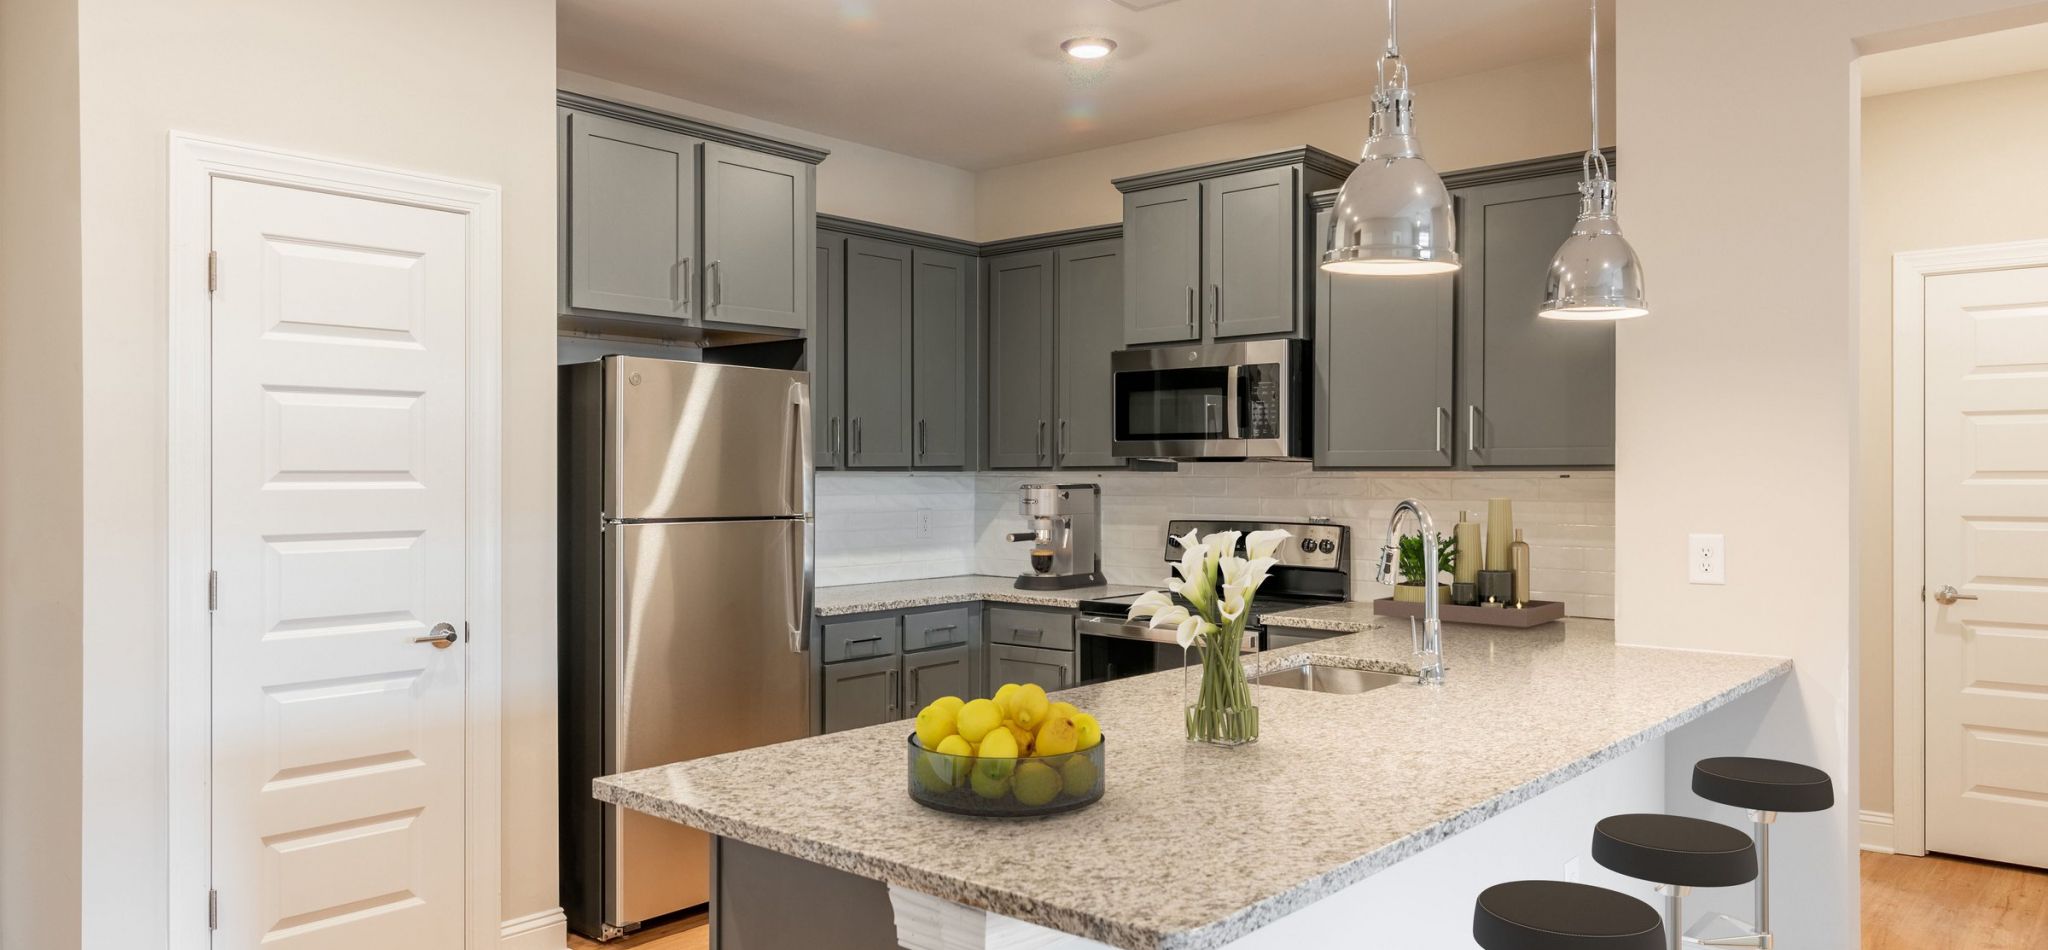 Hawthorne at the Crest apartment kitchen interior with kitchen island, stainless steel appliances, and white cabinetry